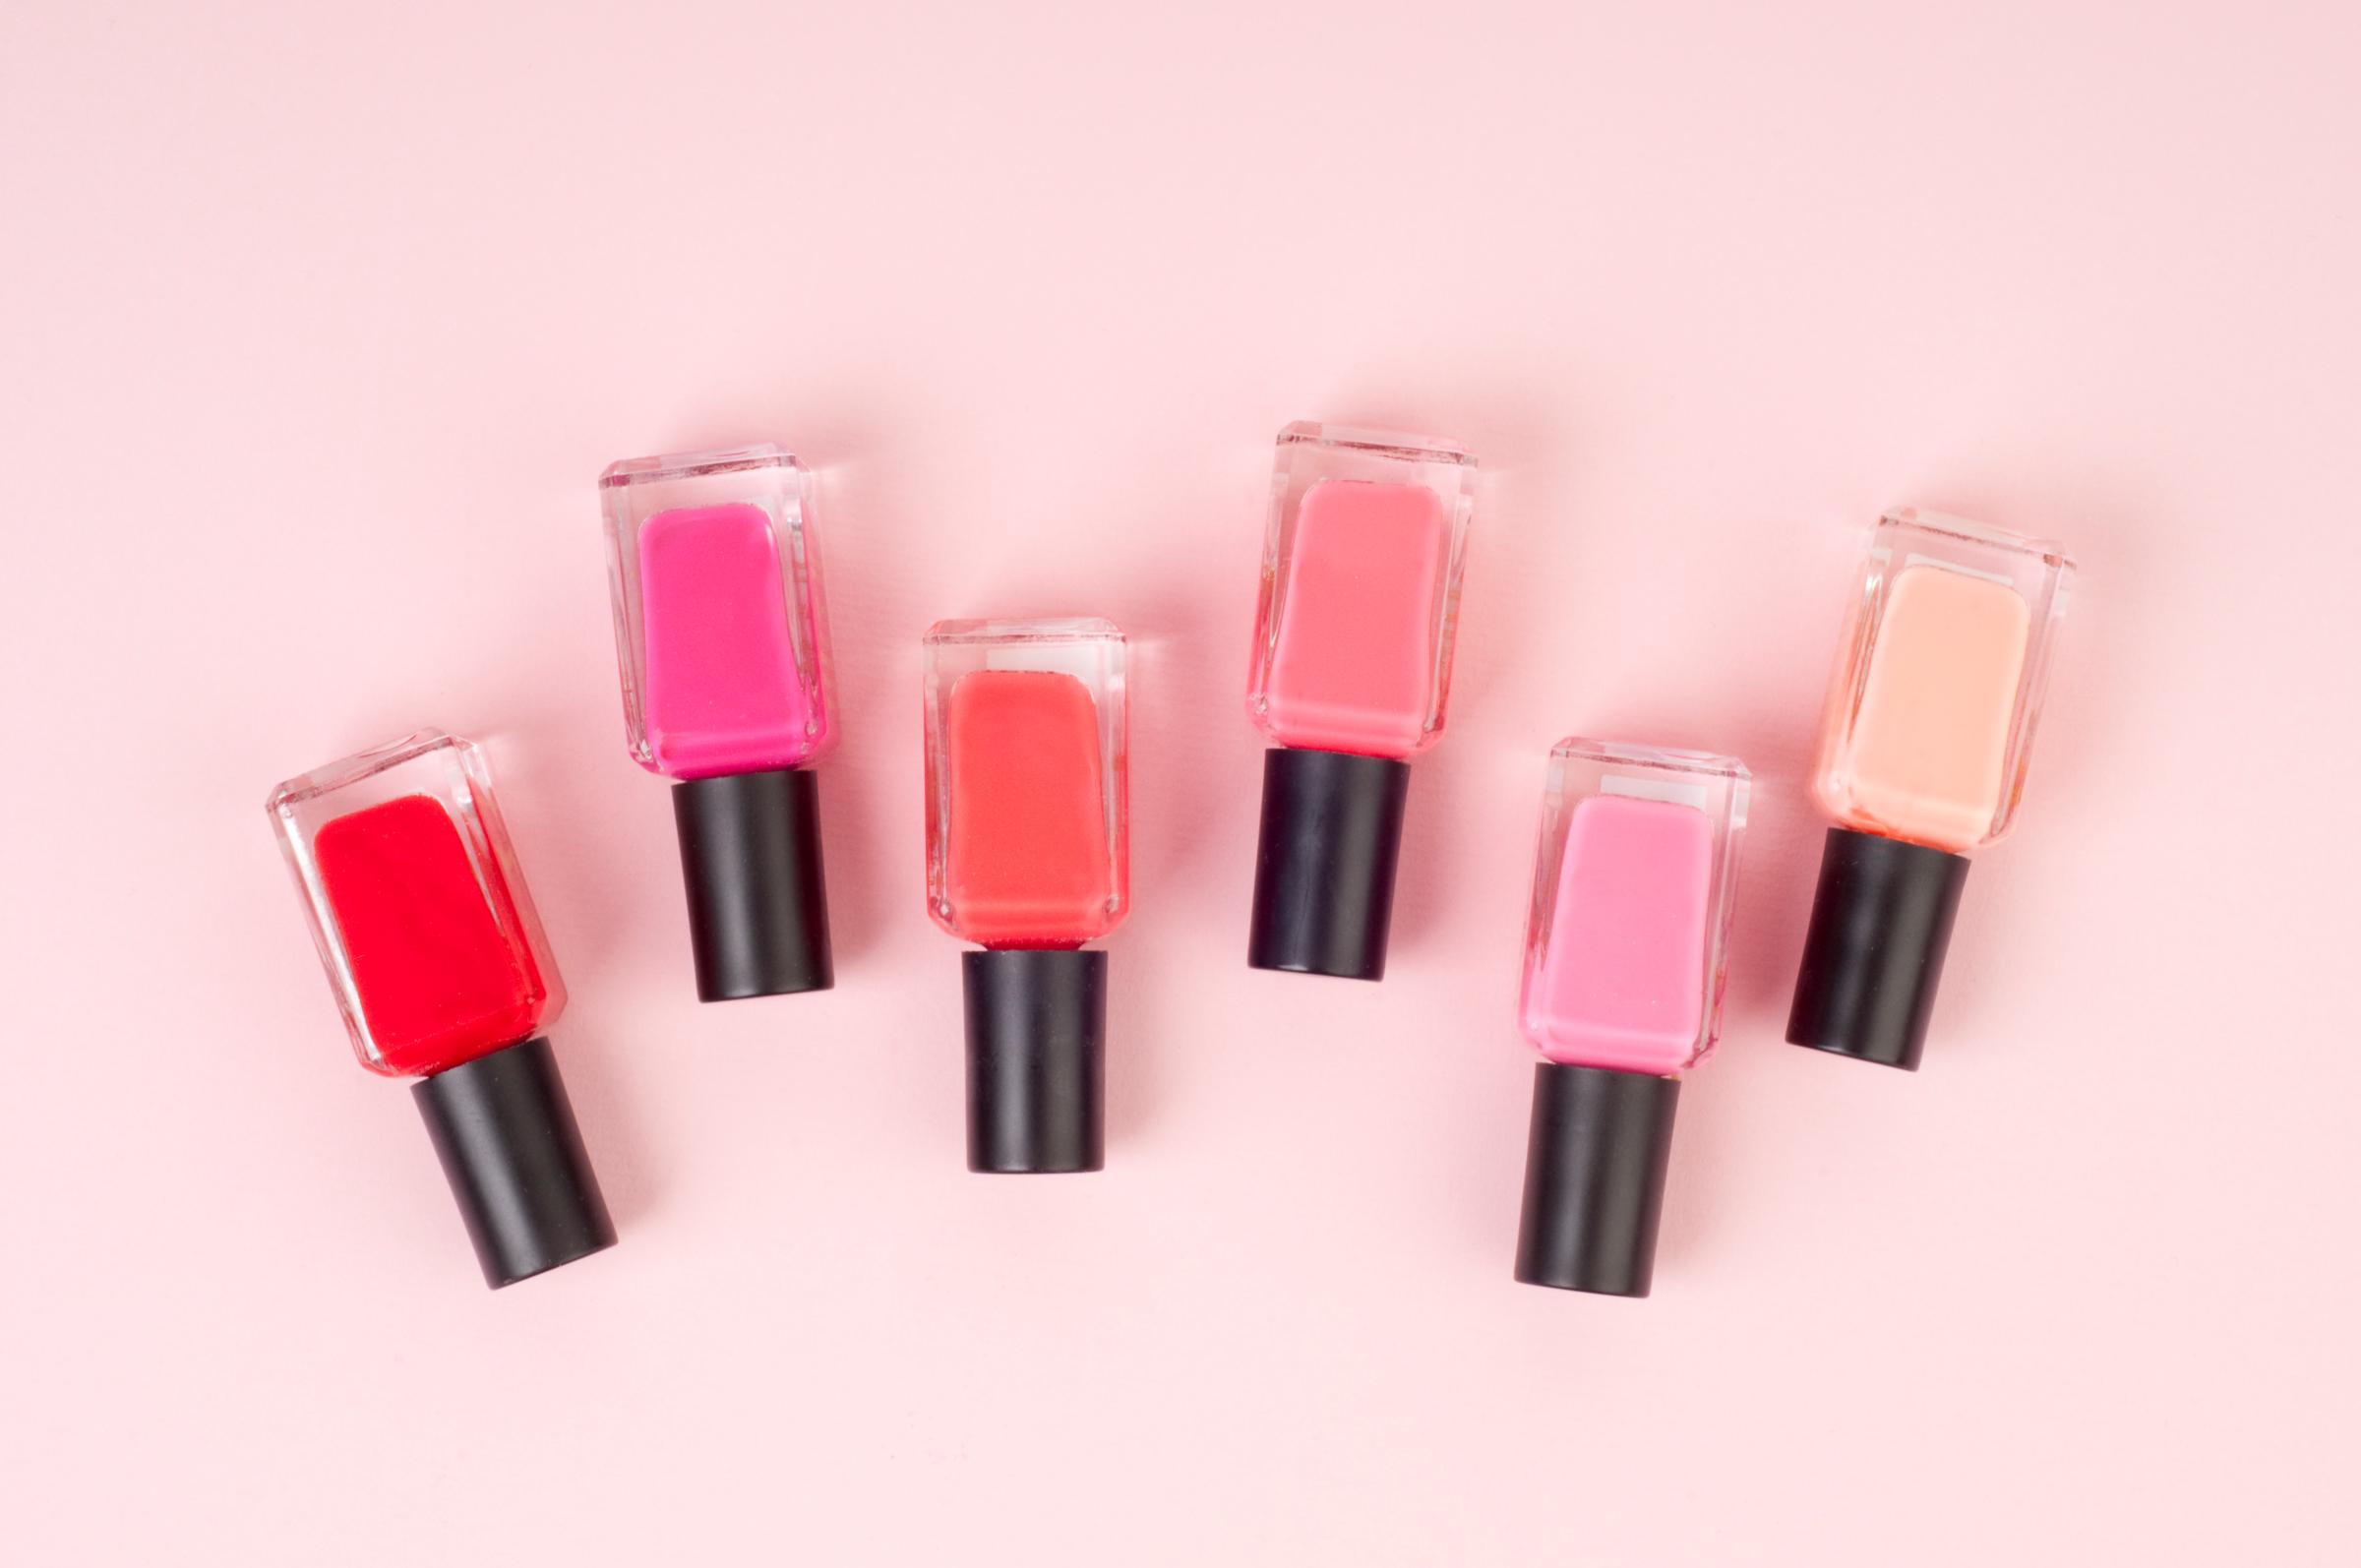 Row of six small bottles of nail polish in various shades of pink, overhead view